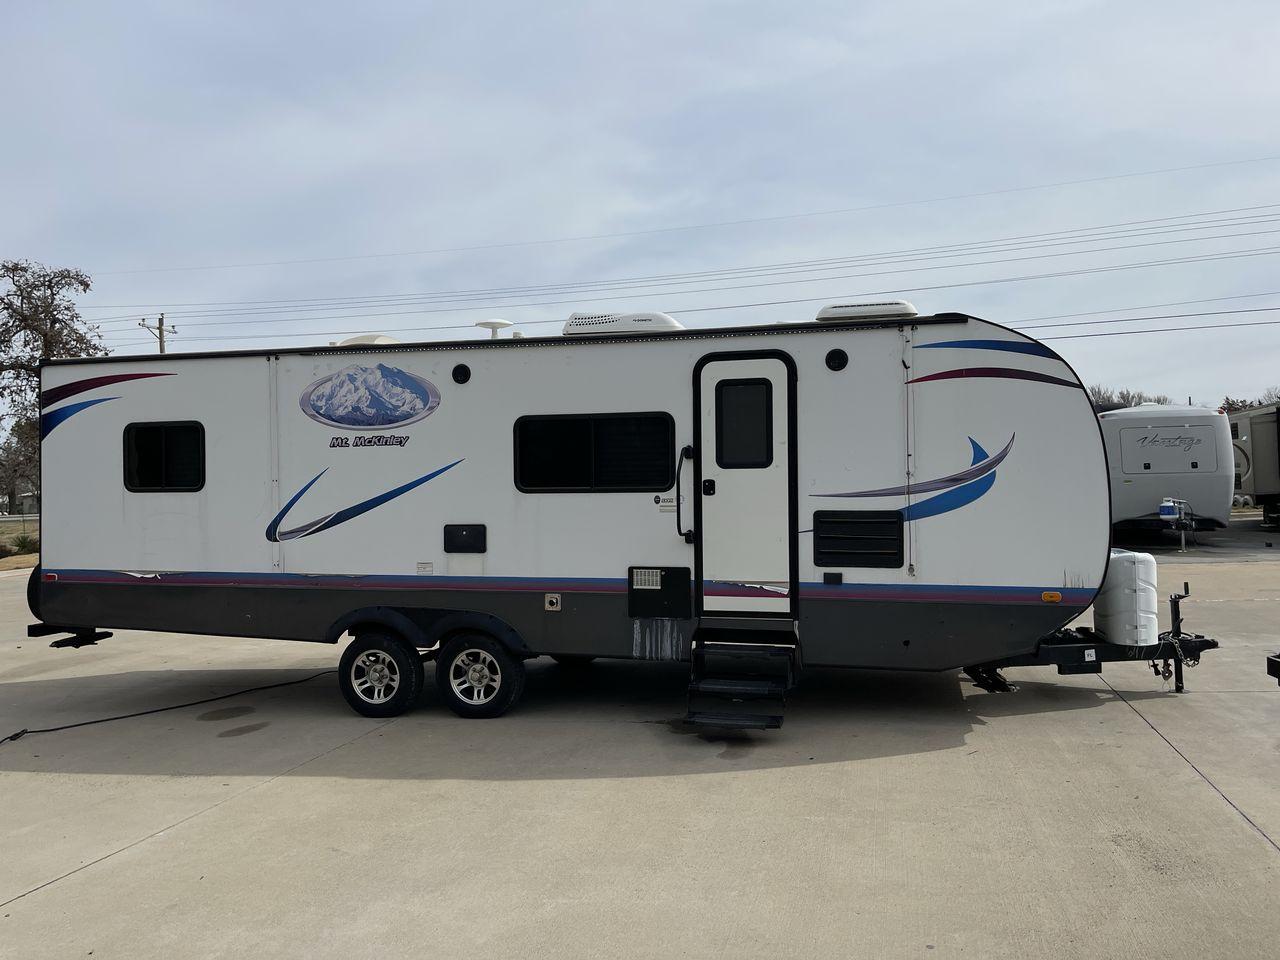 2018 WHITE MT MCKINLEY 830FK (59CCC3221JL) , Length: 32 ft | Dry Weight: 5,660 lbs. | Slides: 1 transmission, located at 4319 N Main St, Cleburne, TX, 76033, (817) 678-5133, 32.385960, -97.391212 - Take the 2018 Mt. McKinley 830FK Travel Trailer on your upcoming journey. This travel trailer provides a well-thought-out living area for your outdoor adventures, all while being tailored for comfort and convenience. This unit measures 32 ft in length by 8 ft in width. It has a dry weight of 5,66 - Photo #22